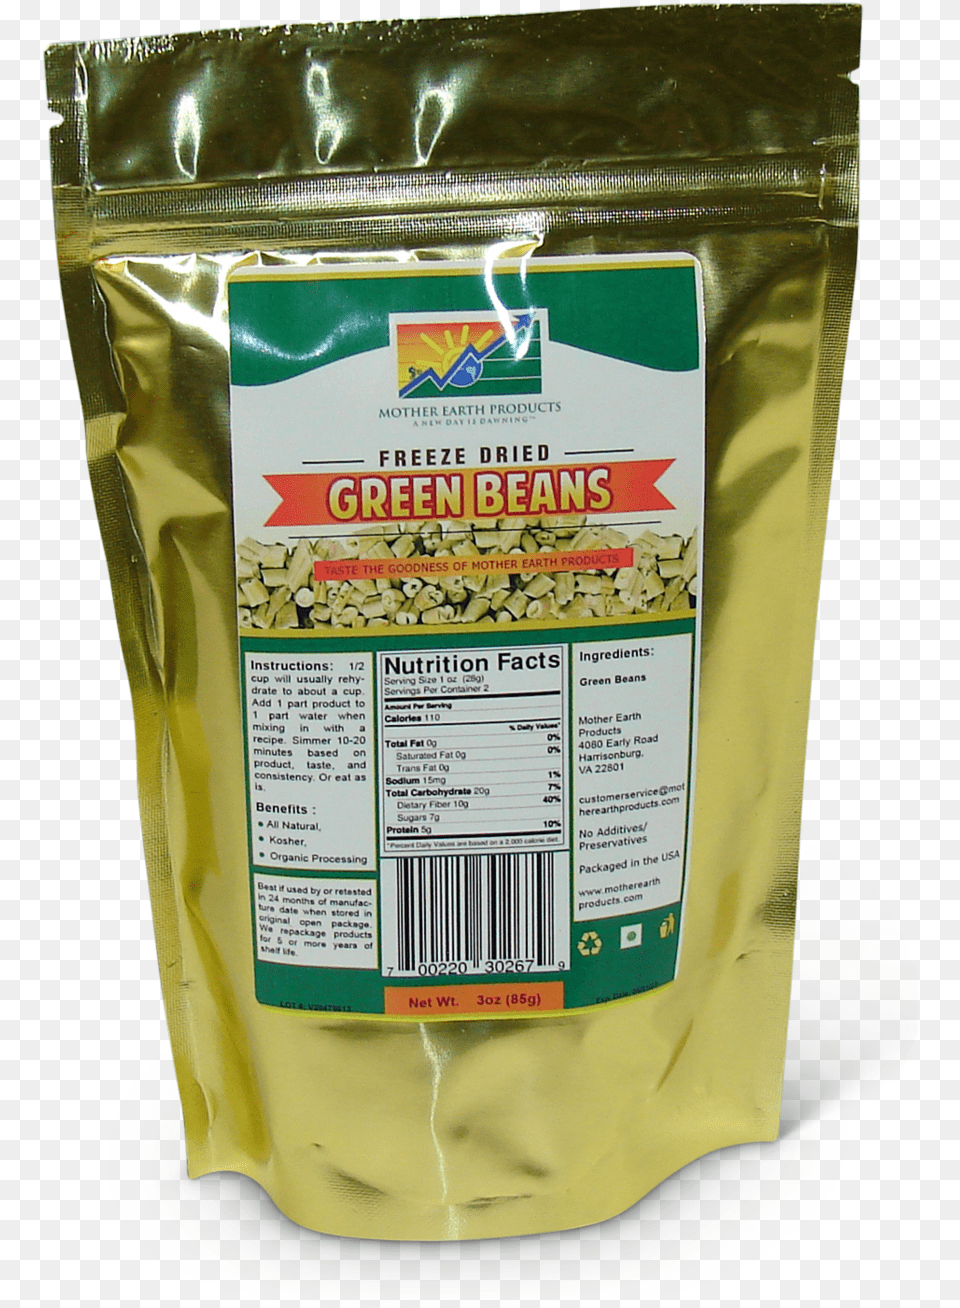 Packaging And Labeling, Food, Cooking Oil Free Png